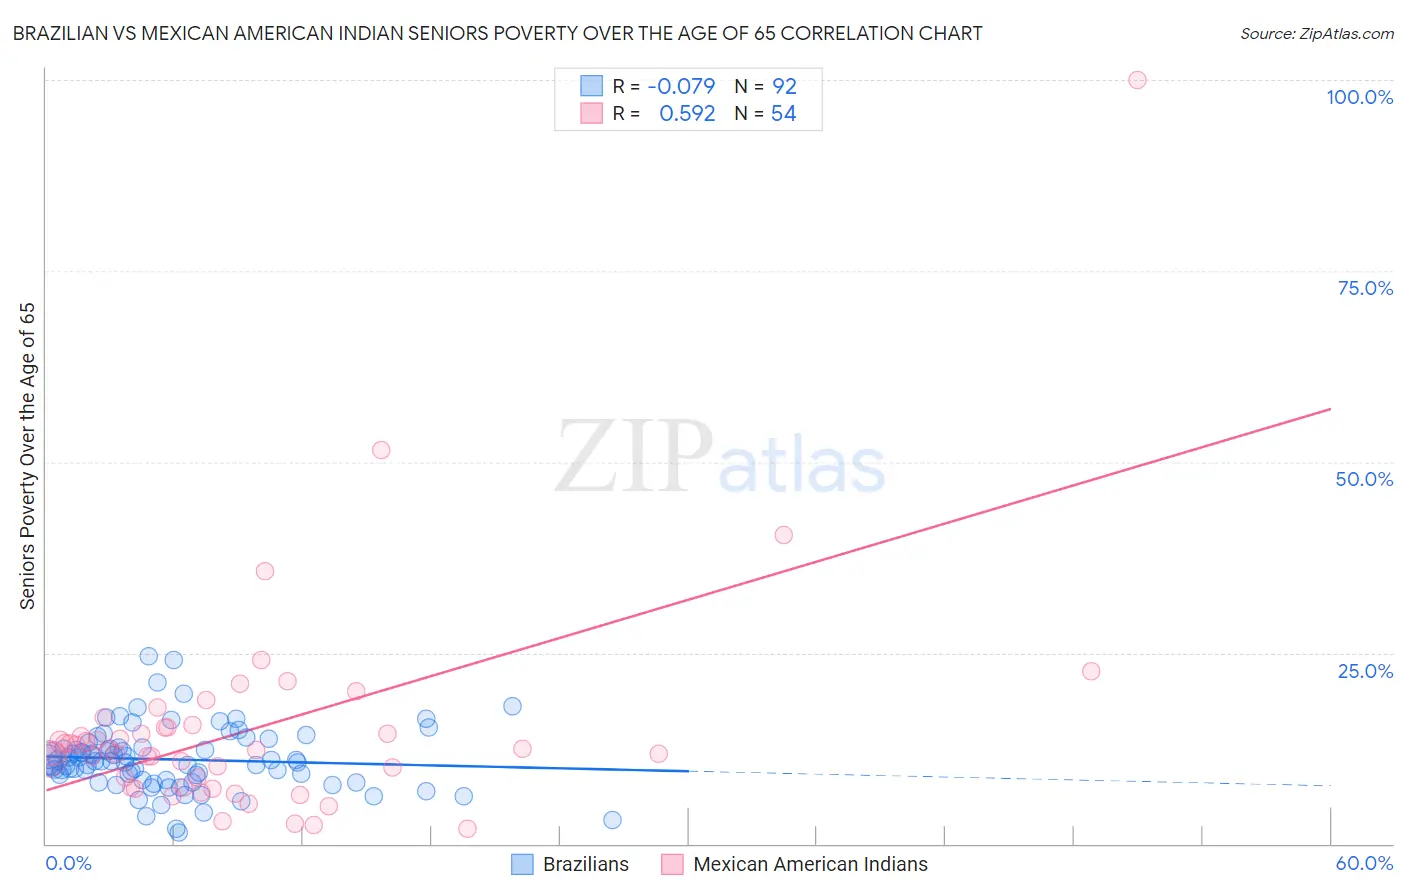 Brazilian vs Mexican American Indian Seniors Poverty Over the Age of 65